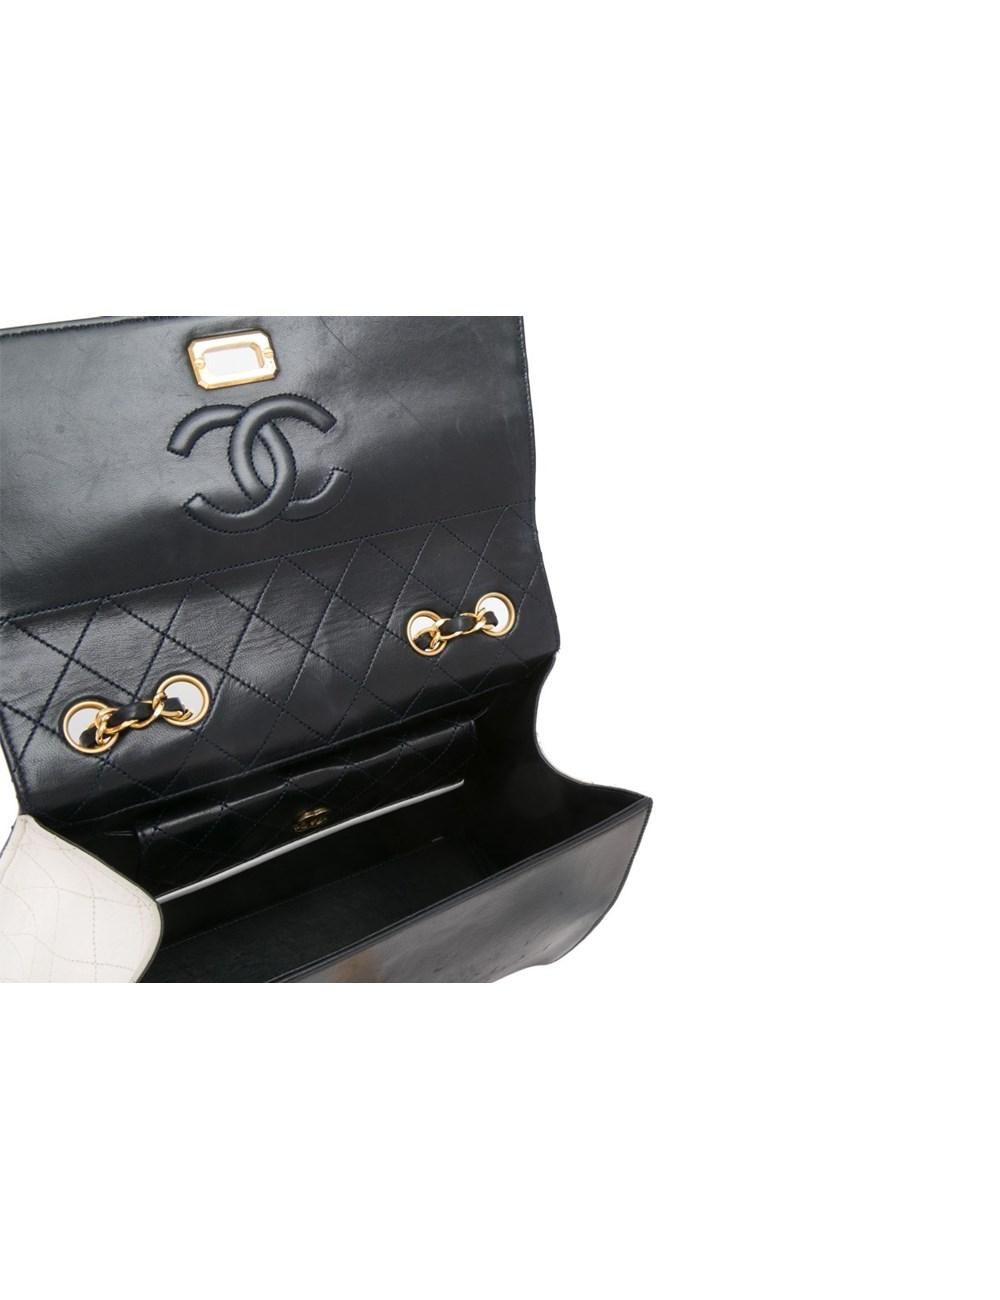 Chanel 1989 Two Tone Black and White Vintage Flap Bag For Sale 13